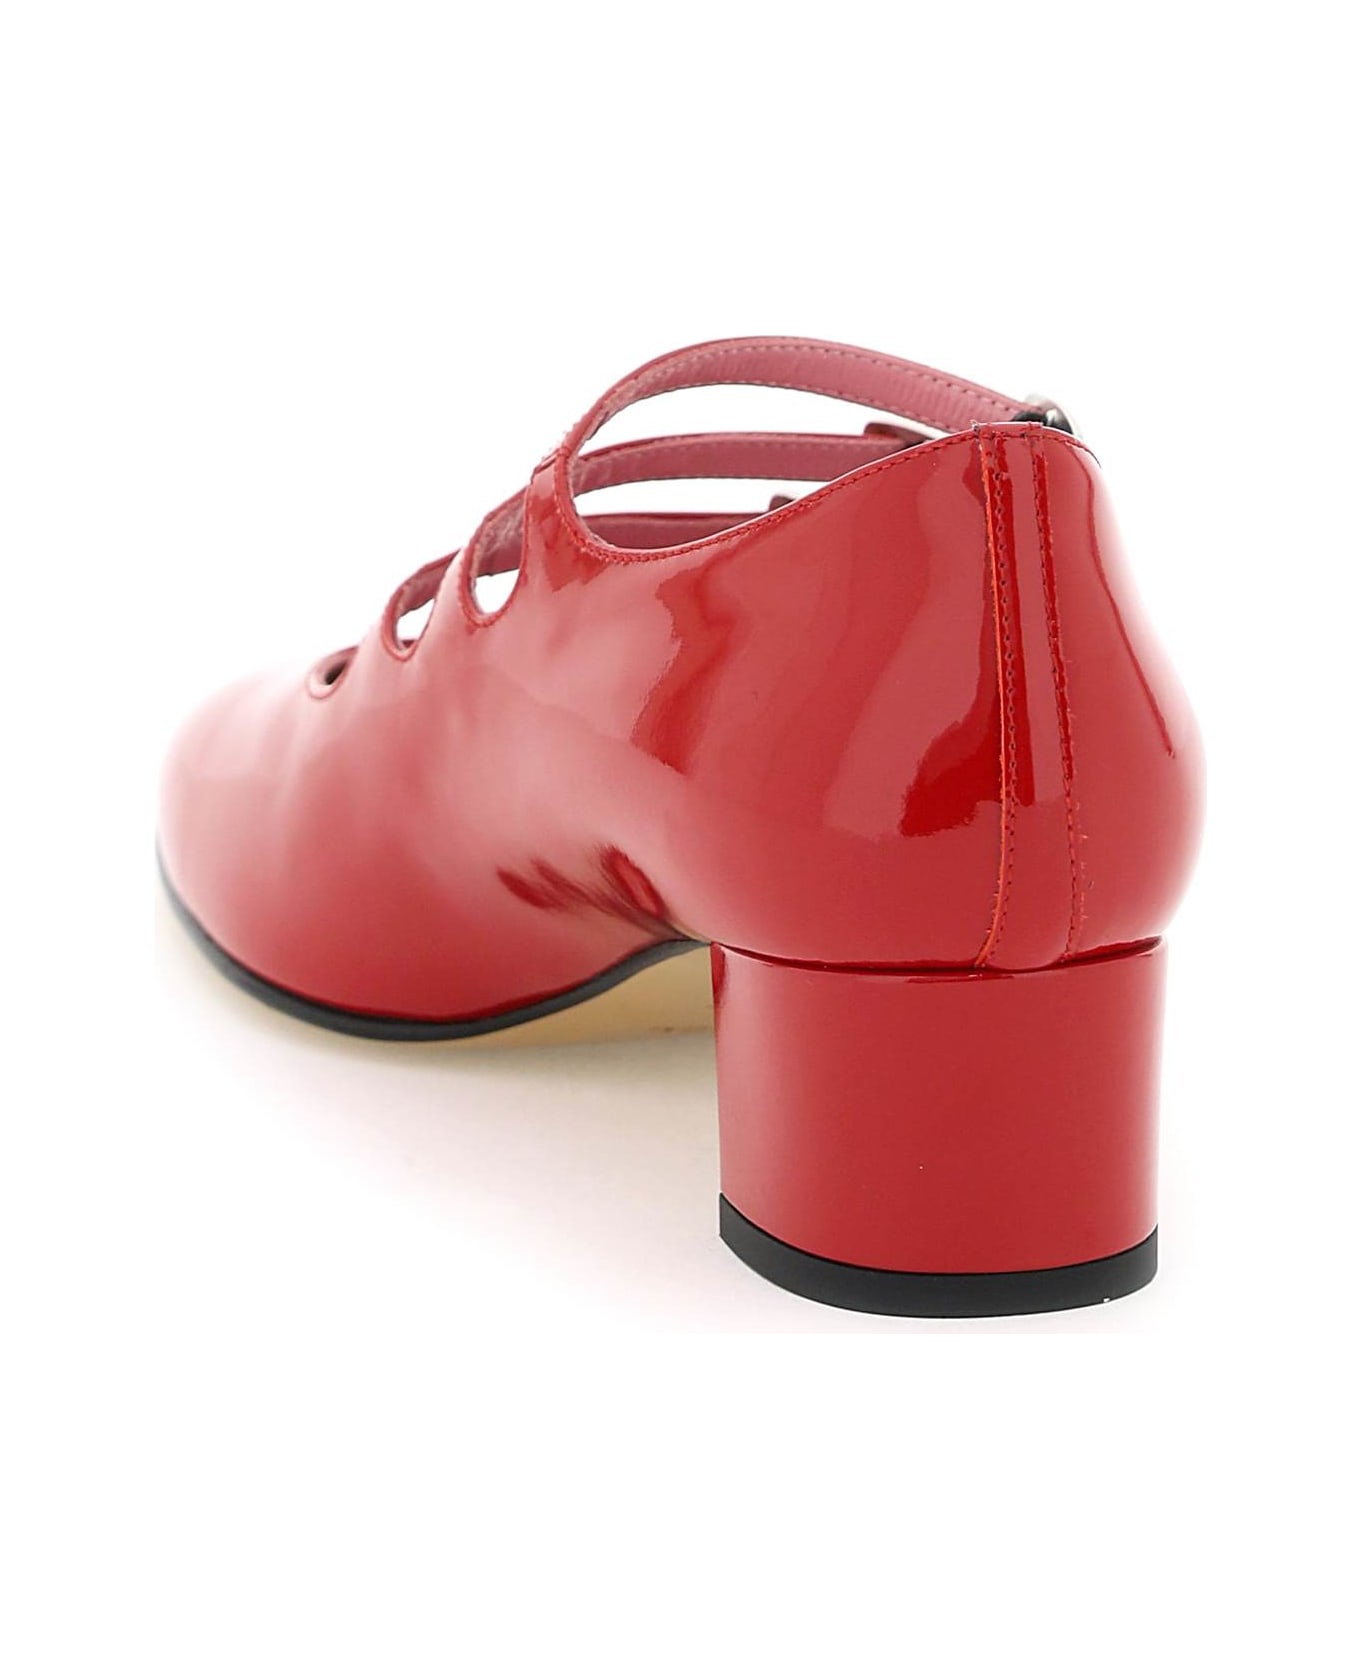 Carel Patent Leather Kina Mary Jane - RED